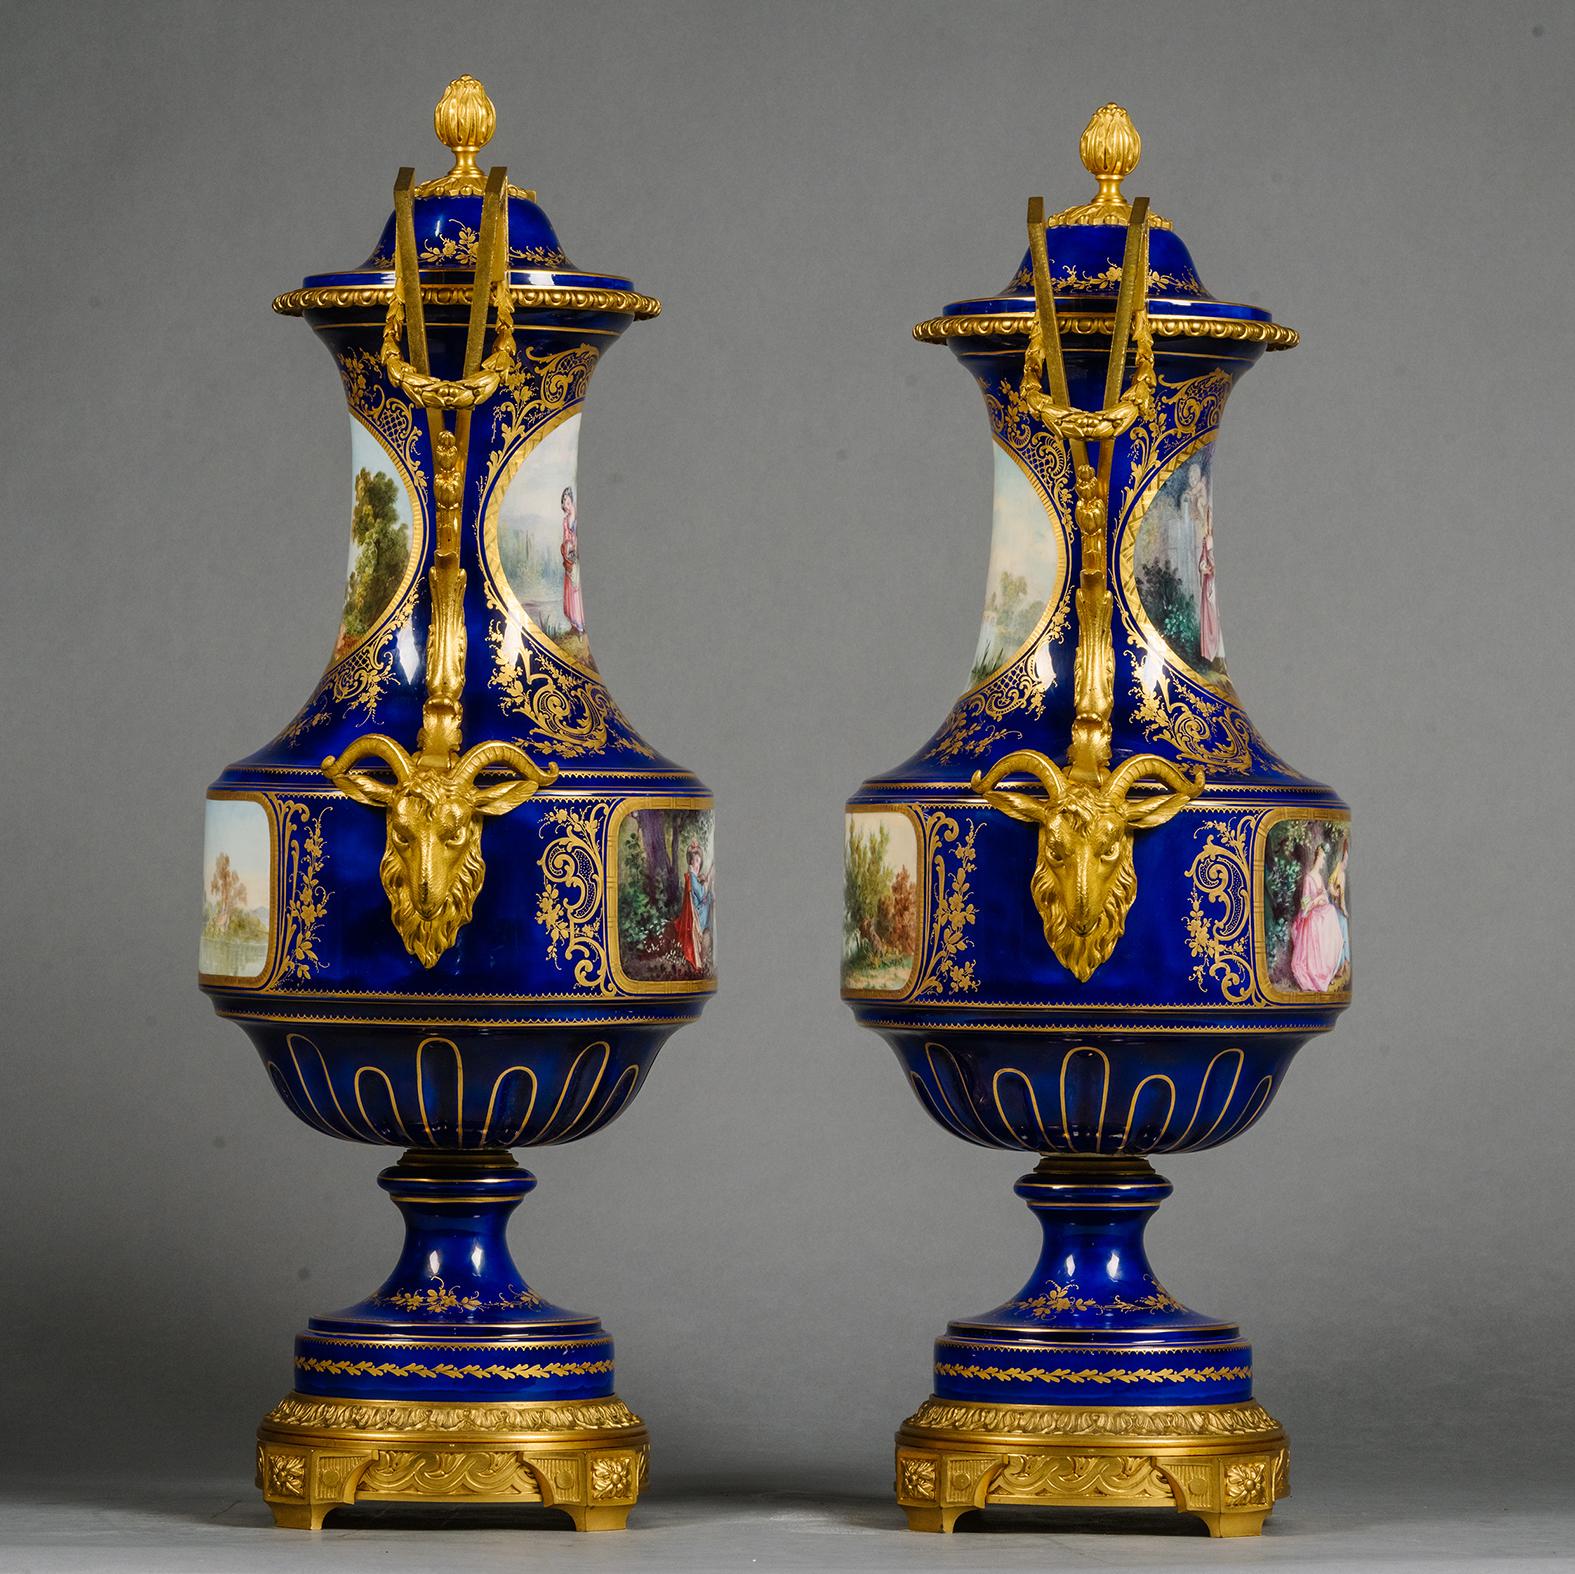 A Large Gilt-Bronze and Sèvres Style Porcelain Three-Piece Clock Garniture For Sale 1